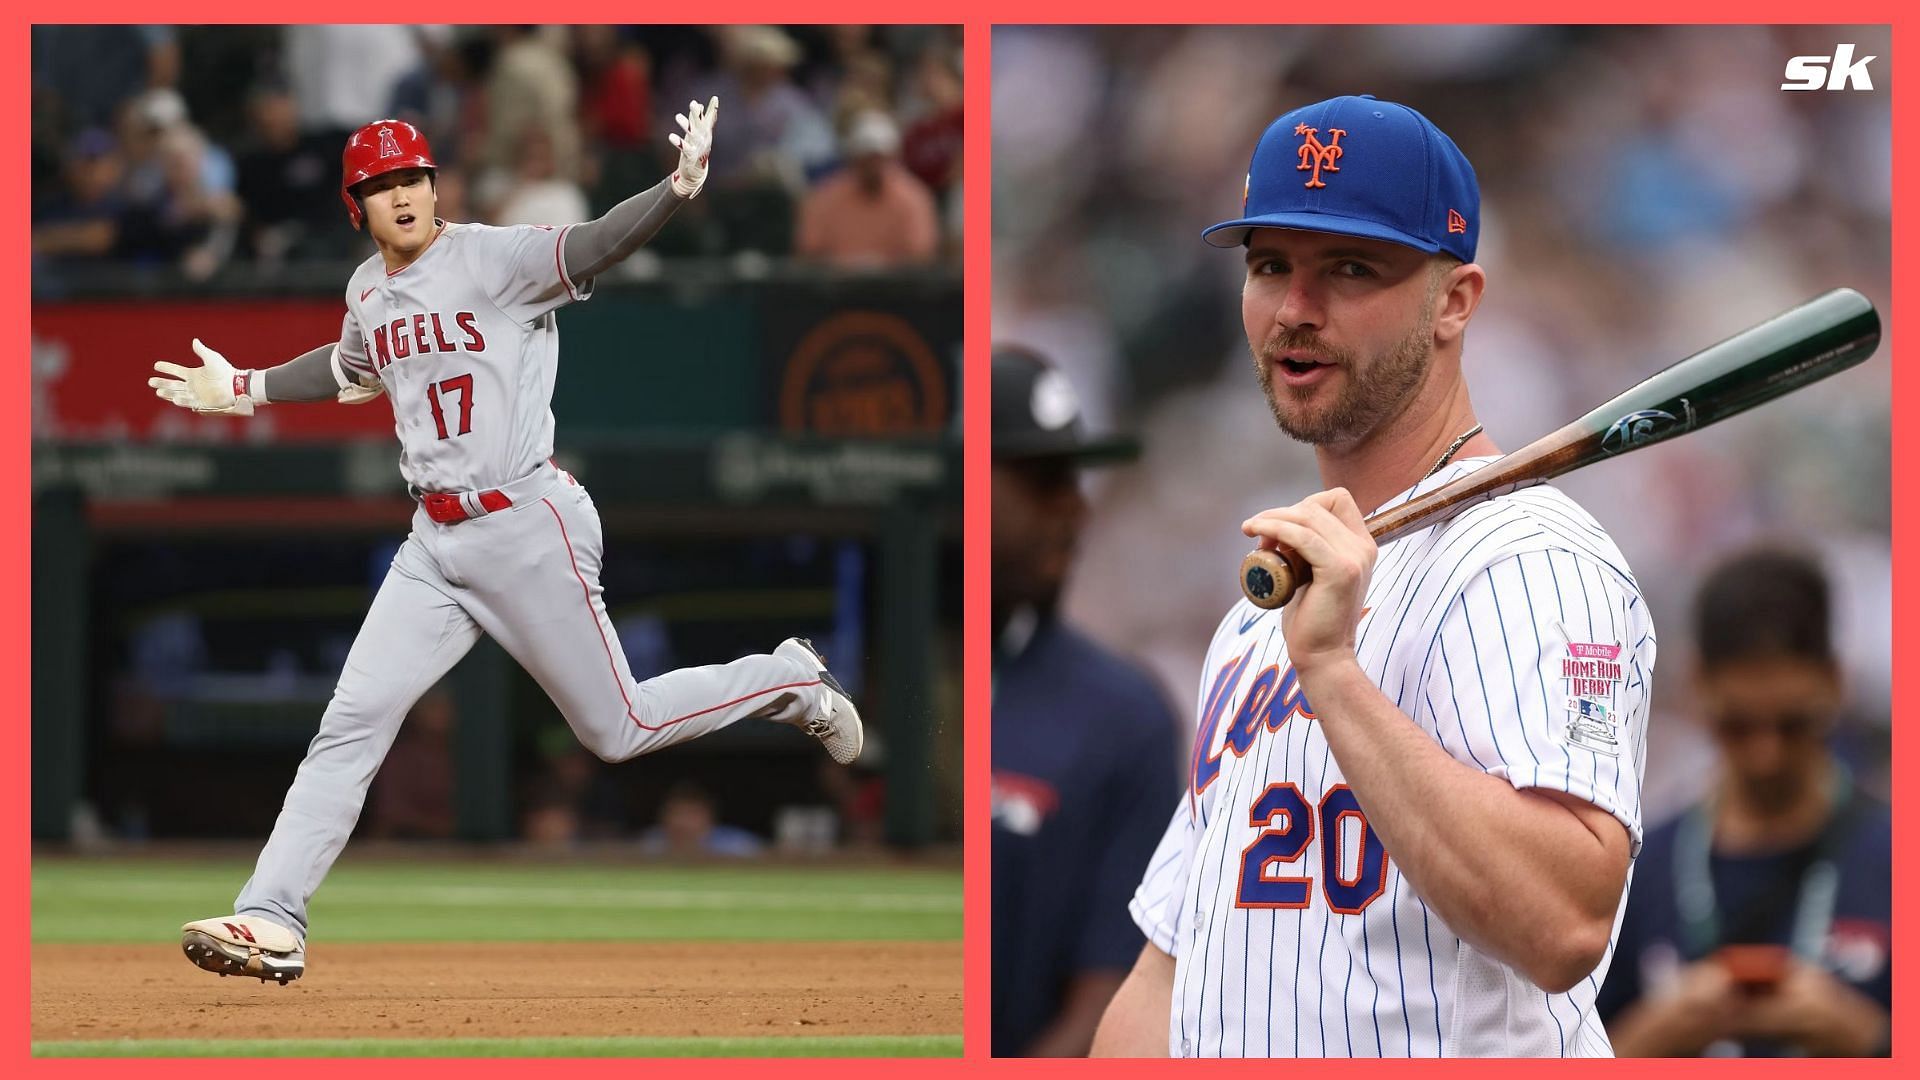 Pete Alonso of the New York Mets will go up against Shohei Ohtani of the Los Angeles Angels in MLB